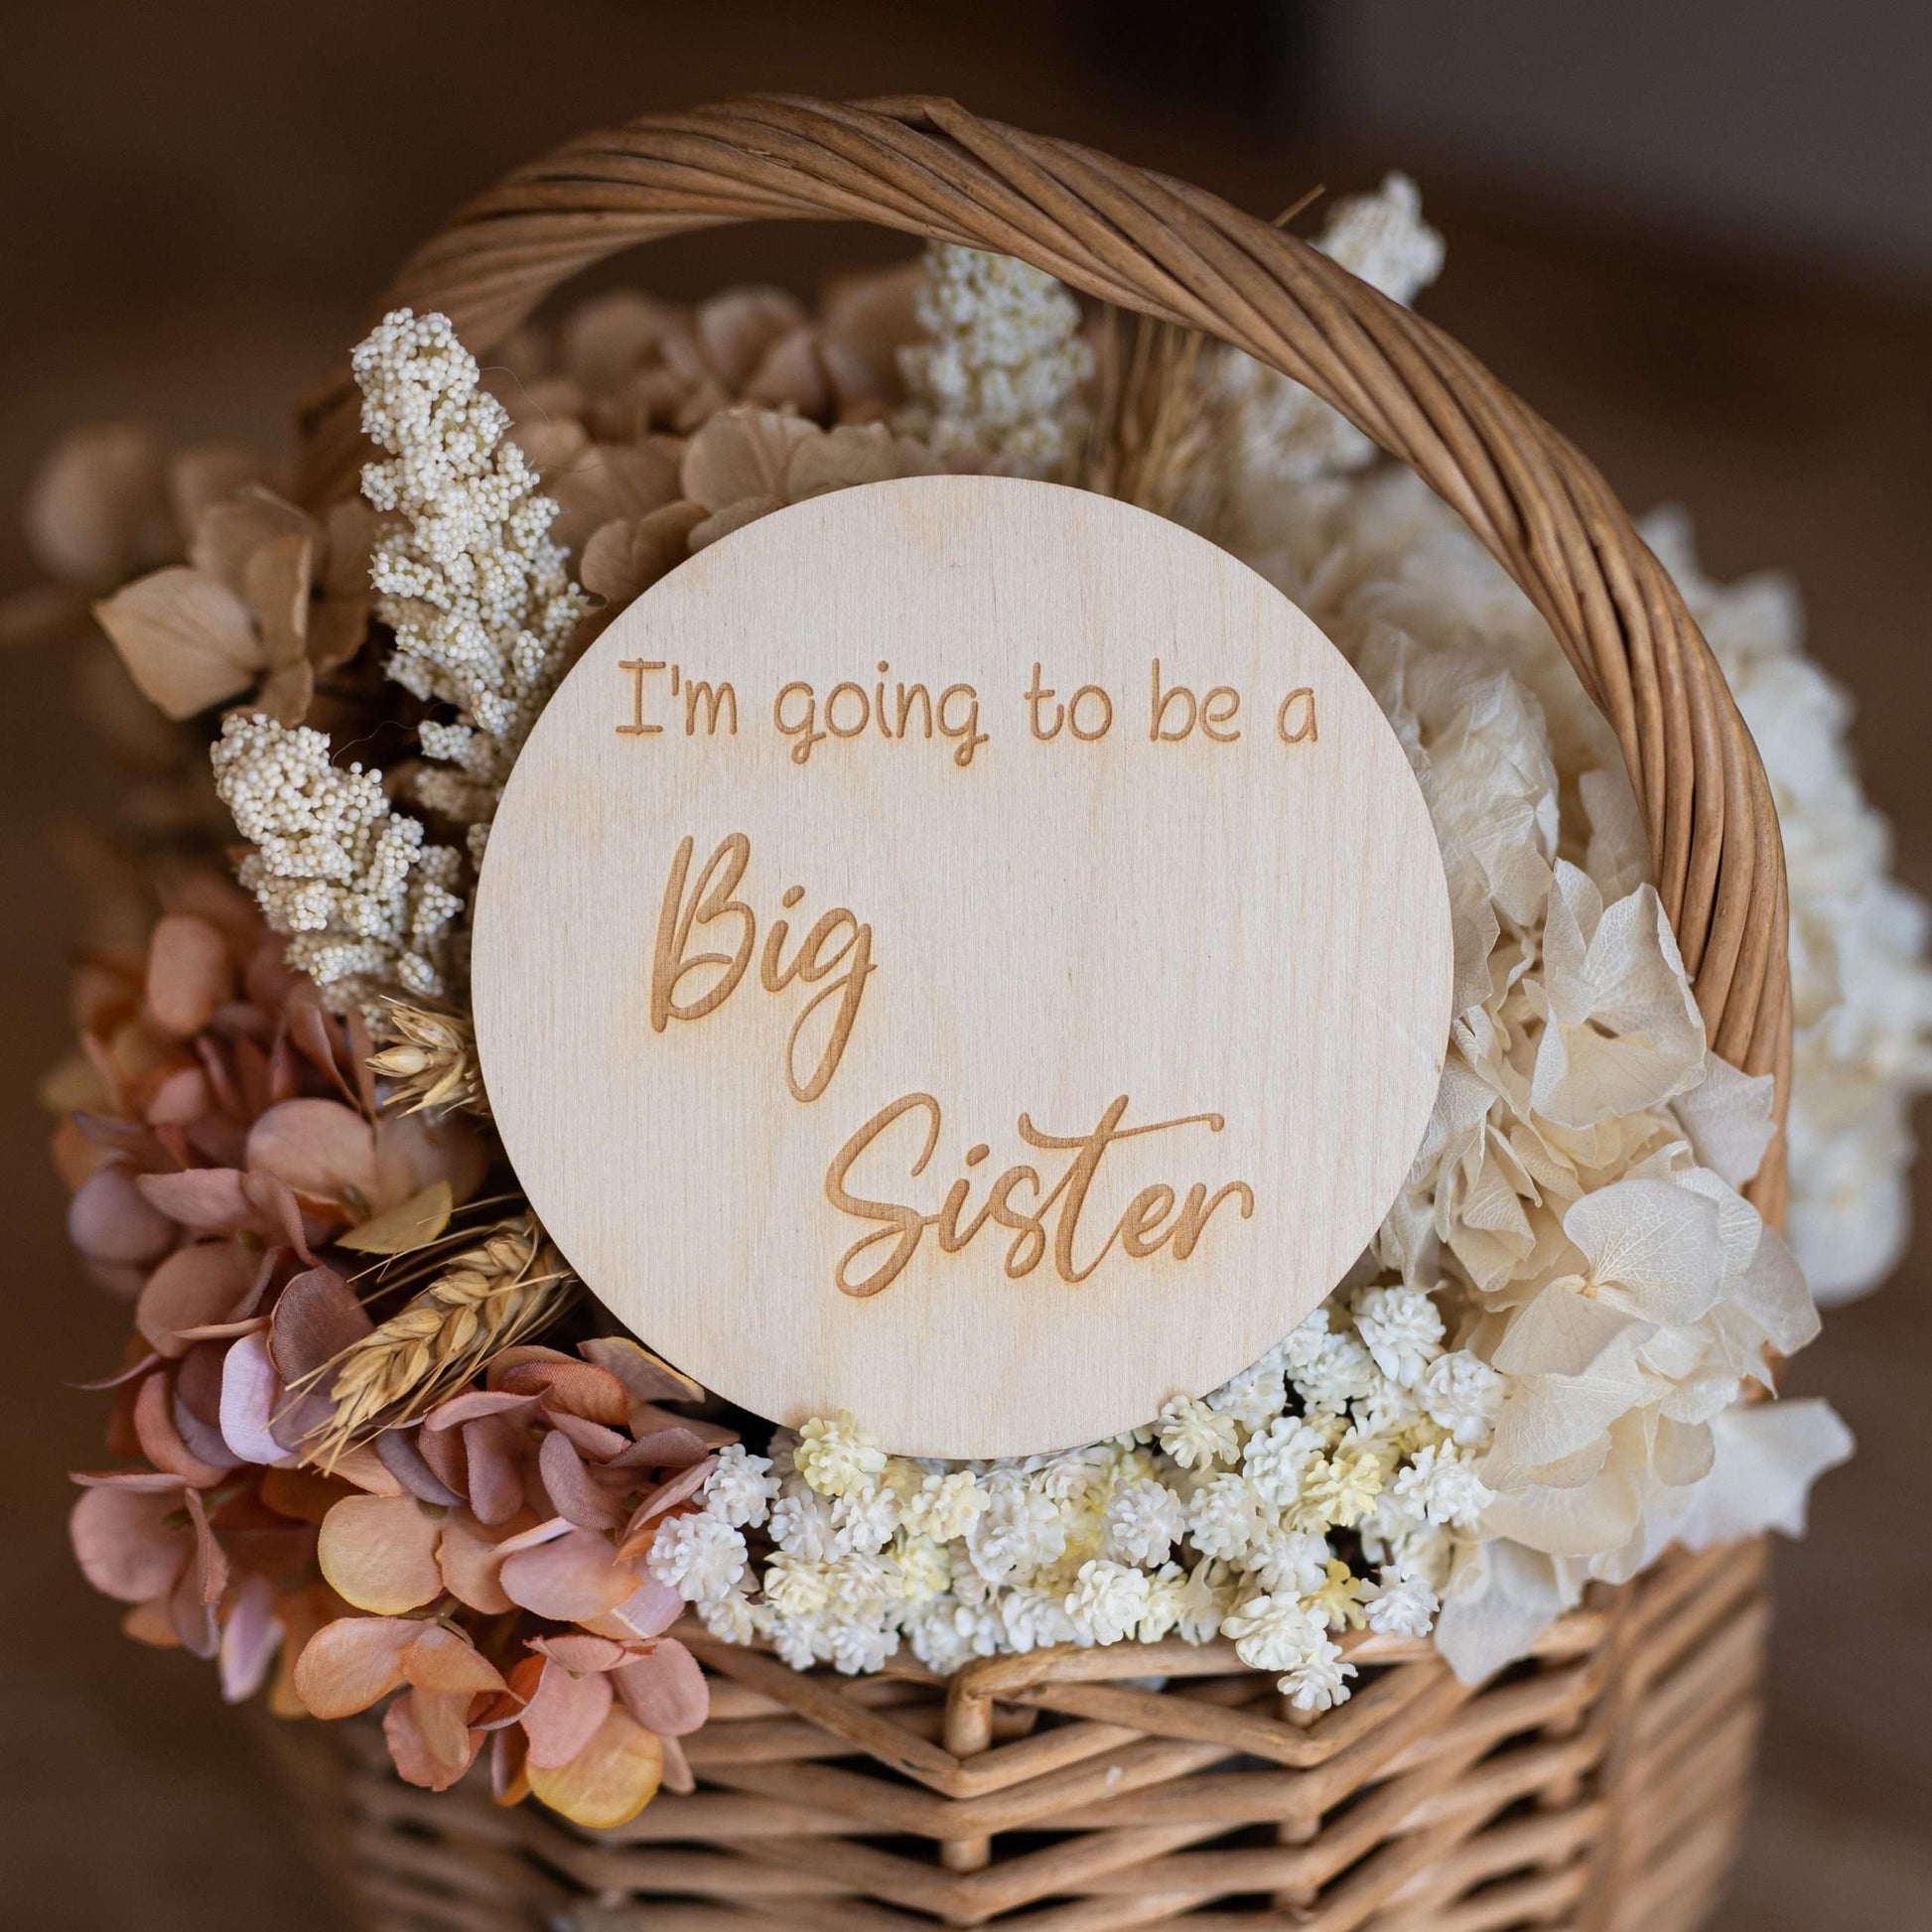 I'm Going To Be a Big Sister